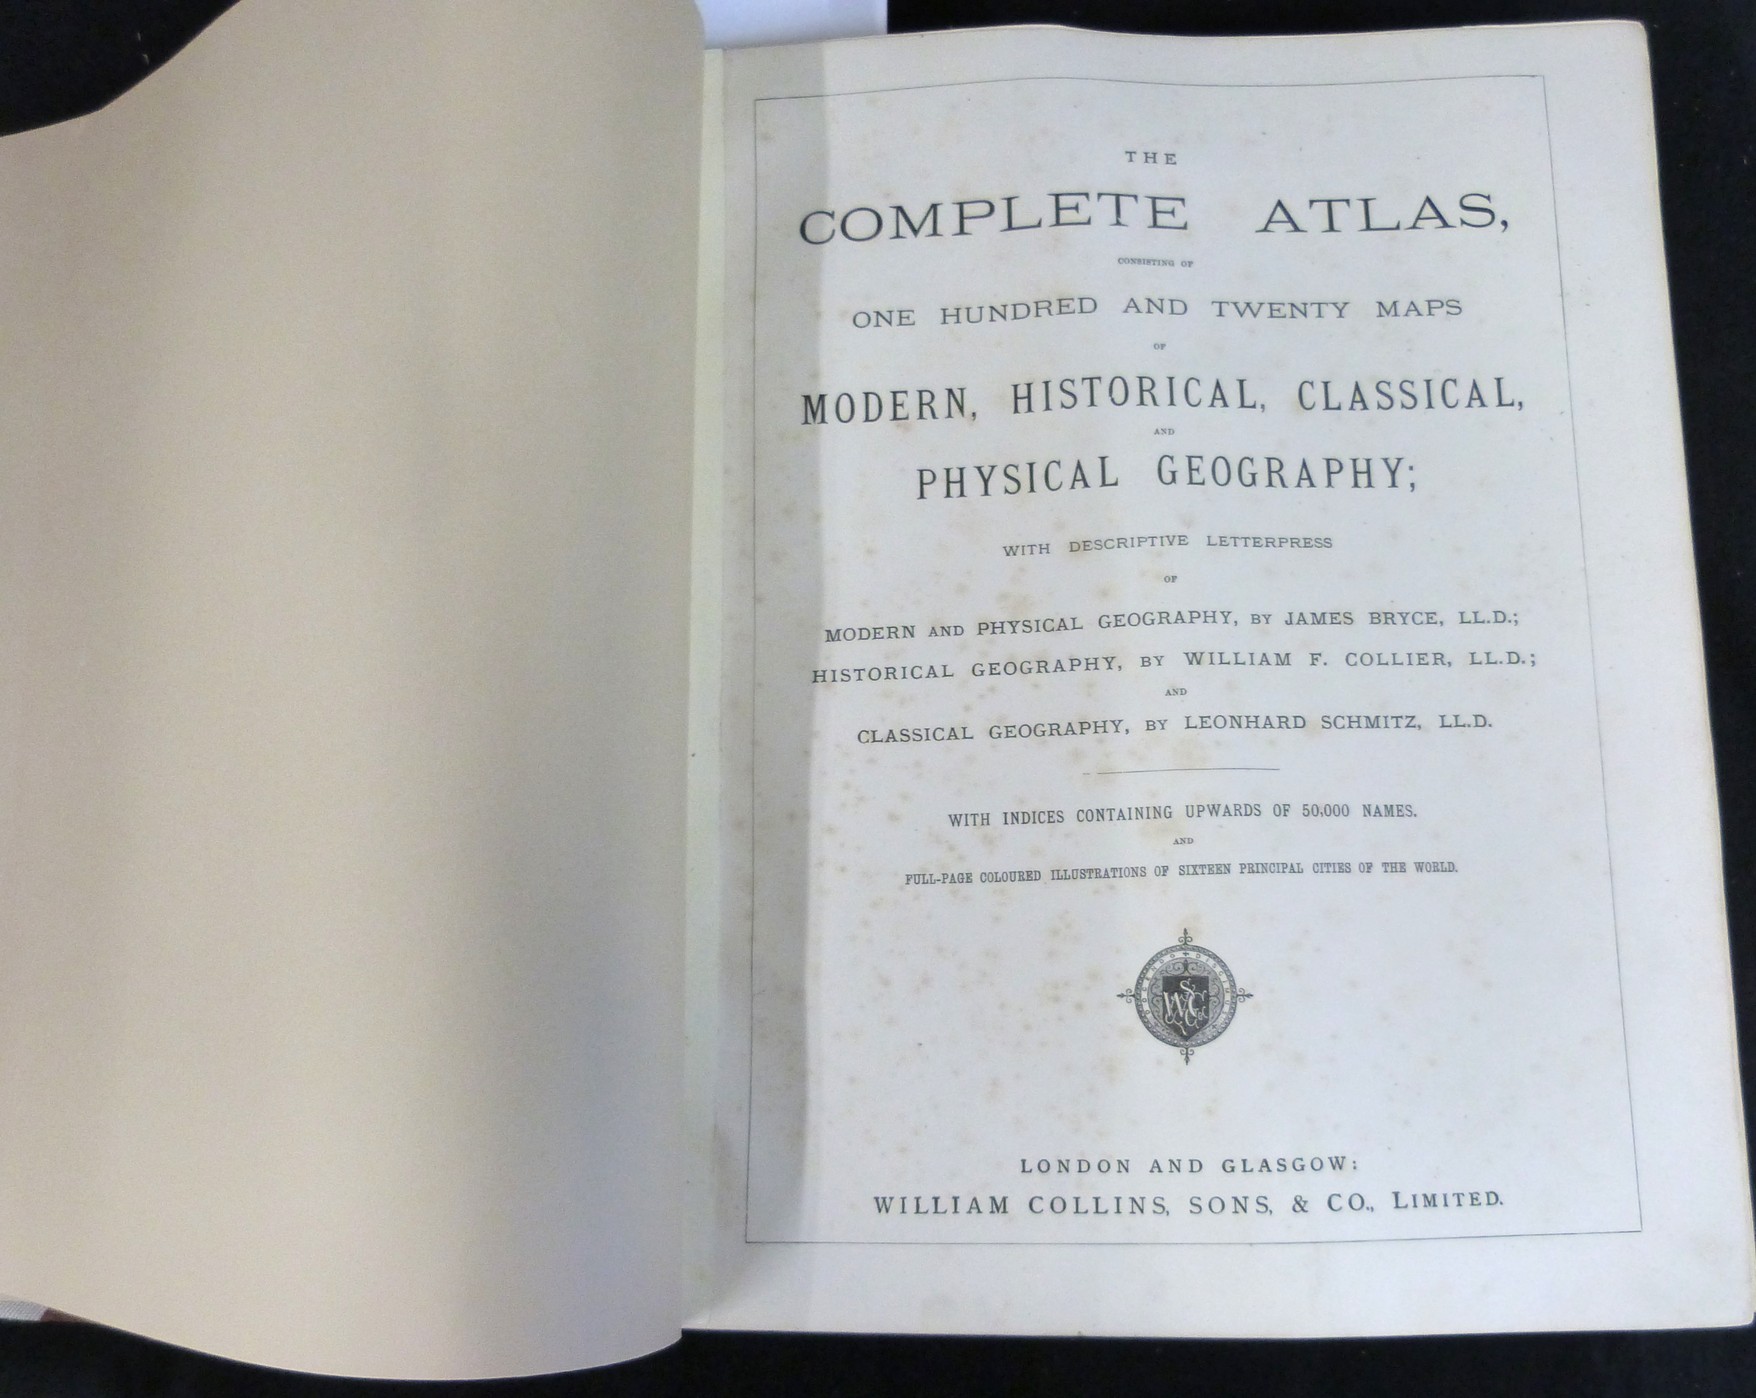 JAMES BRYCE, WILLIAM F COLLIER & LEONHARD SCHMITZ: THE COMPLETE ATLAS CONSISTING OF ONE HUNDRED